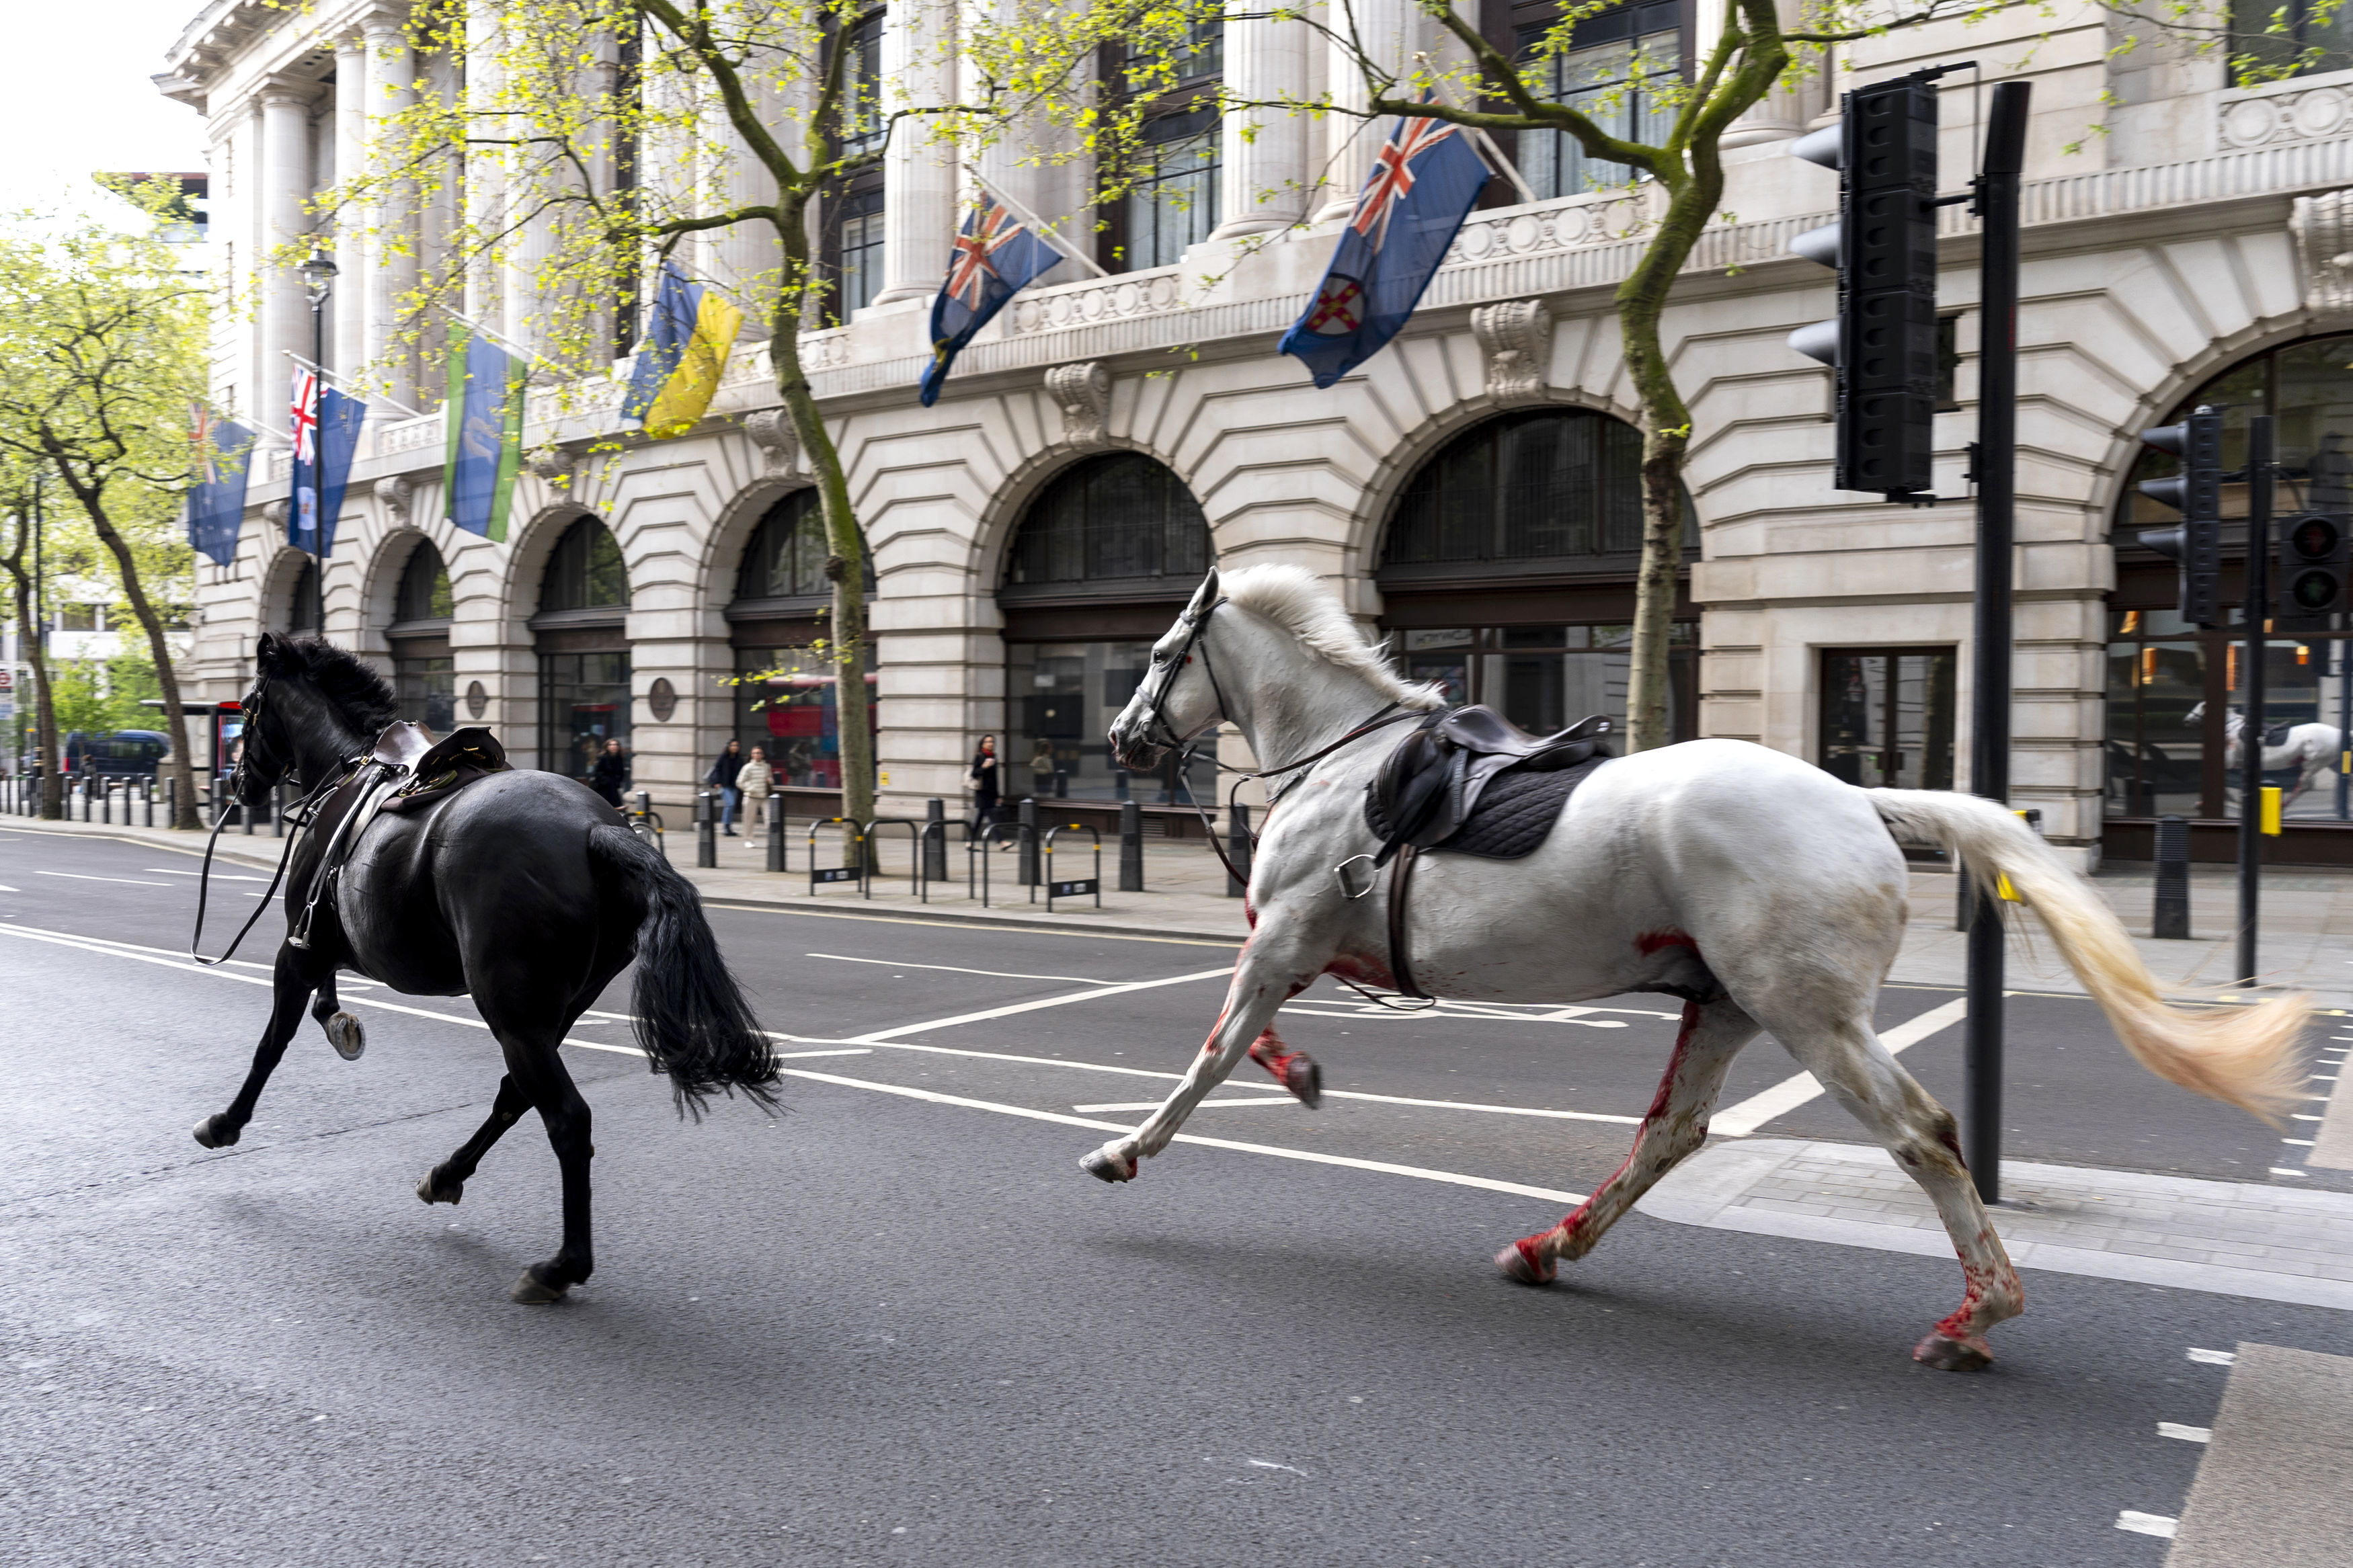 2 Military Horses That Broke Free And Ran Loose Across London Are In Serious Condition